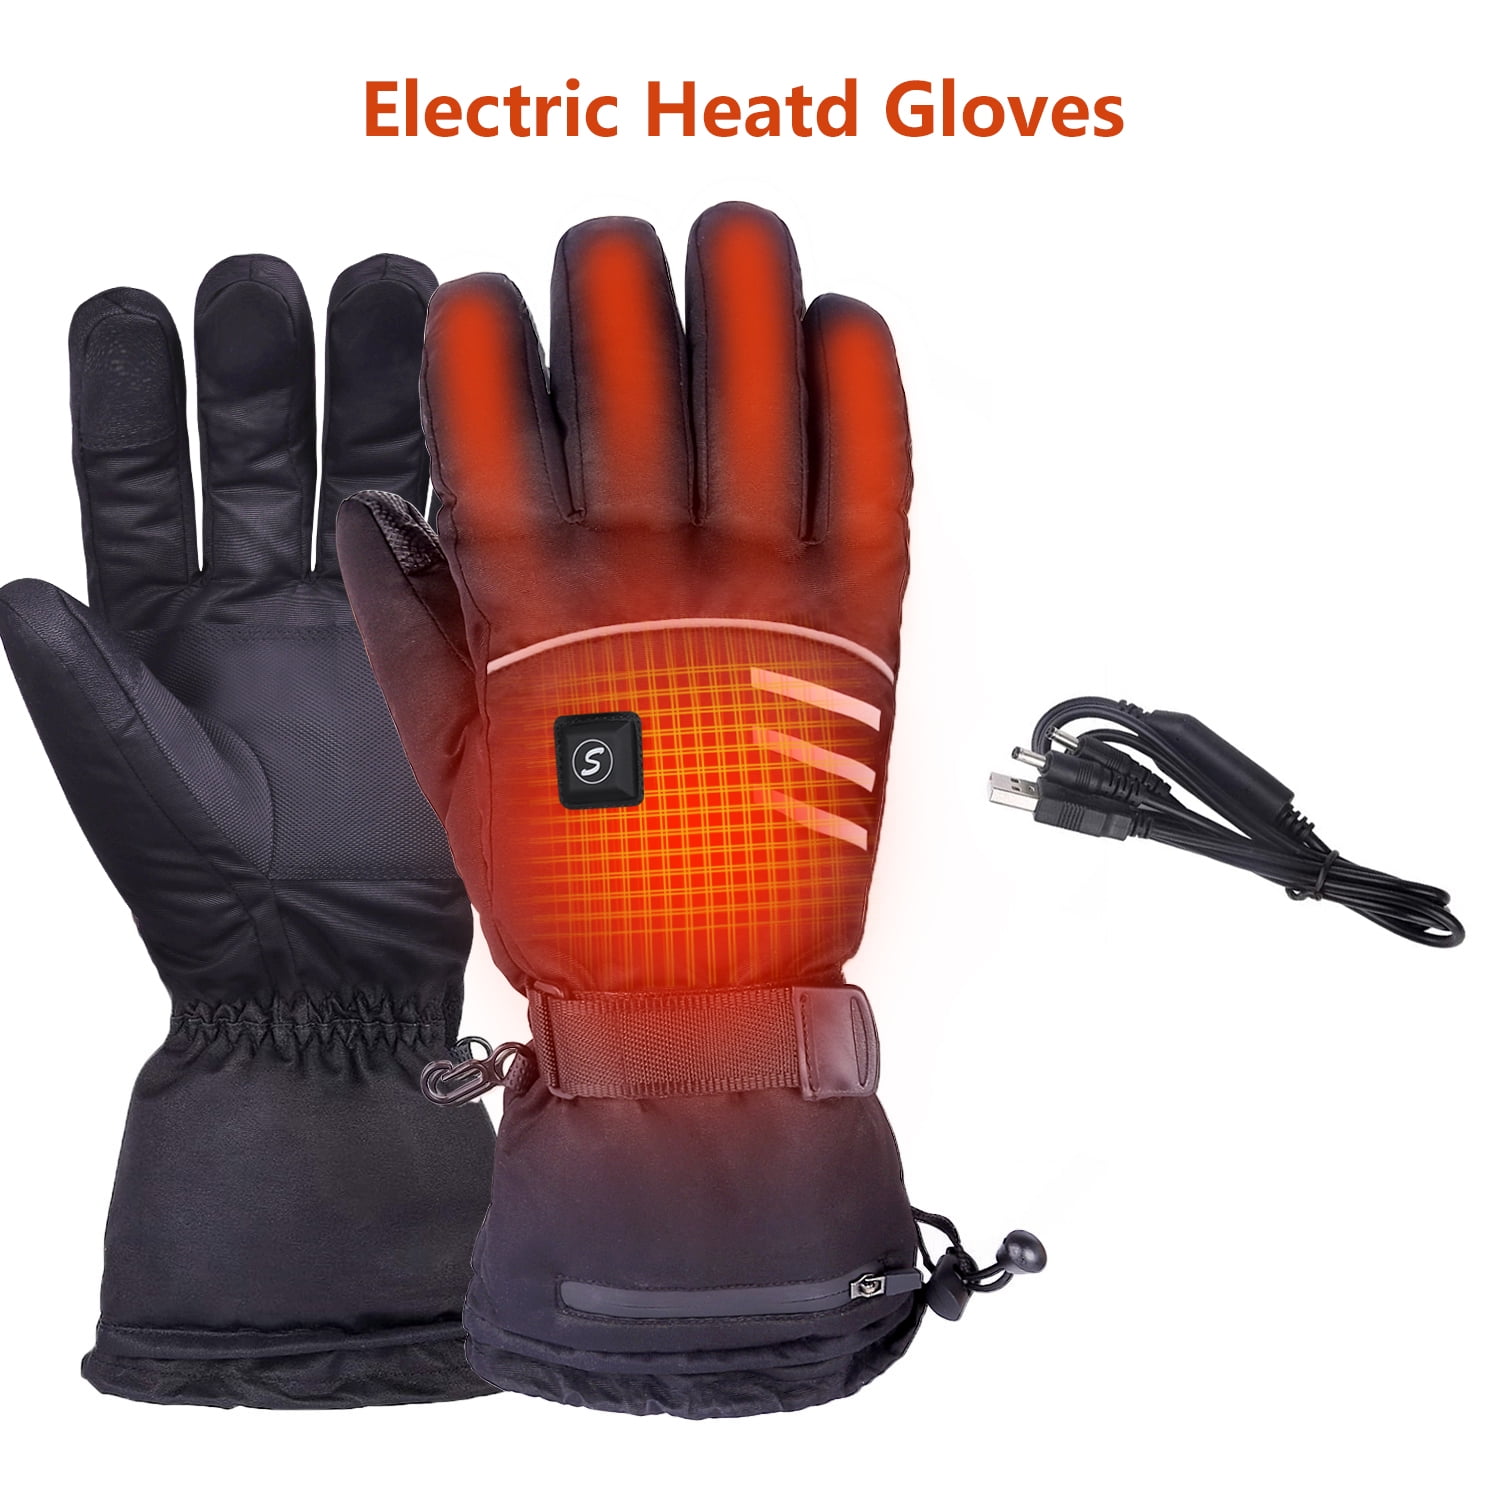 Heated Gloves Electric Rechargeable Waterproof Breathable Winter Thermal Gloves for man and women 3 Heating Levels Intelligent Control 